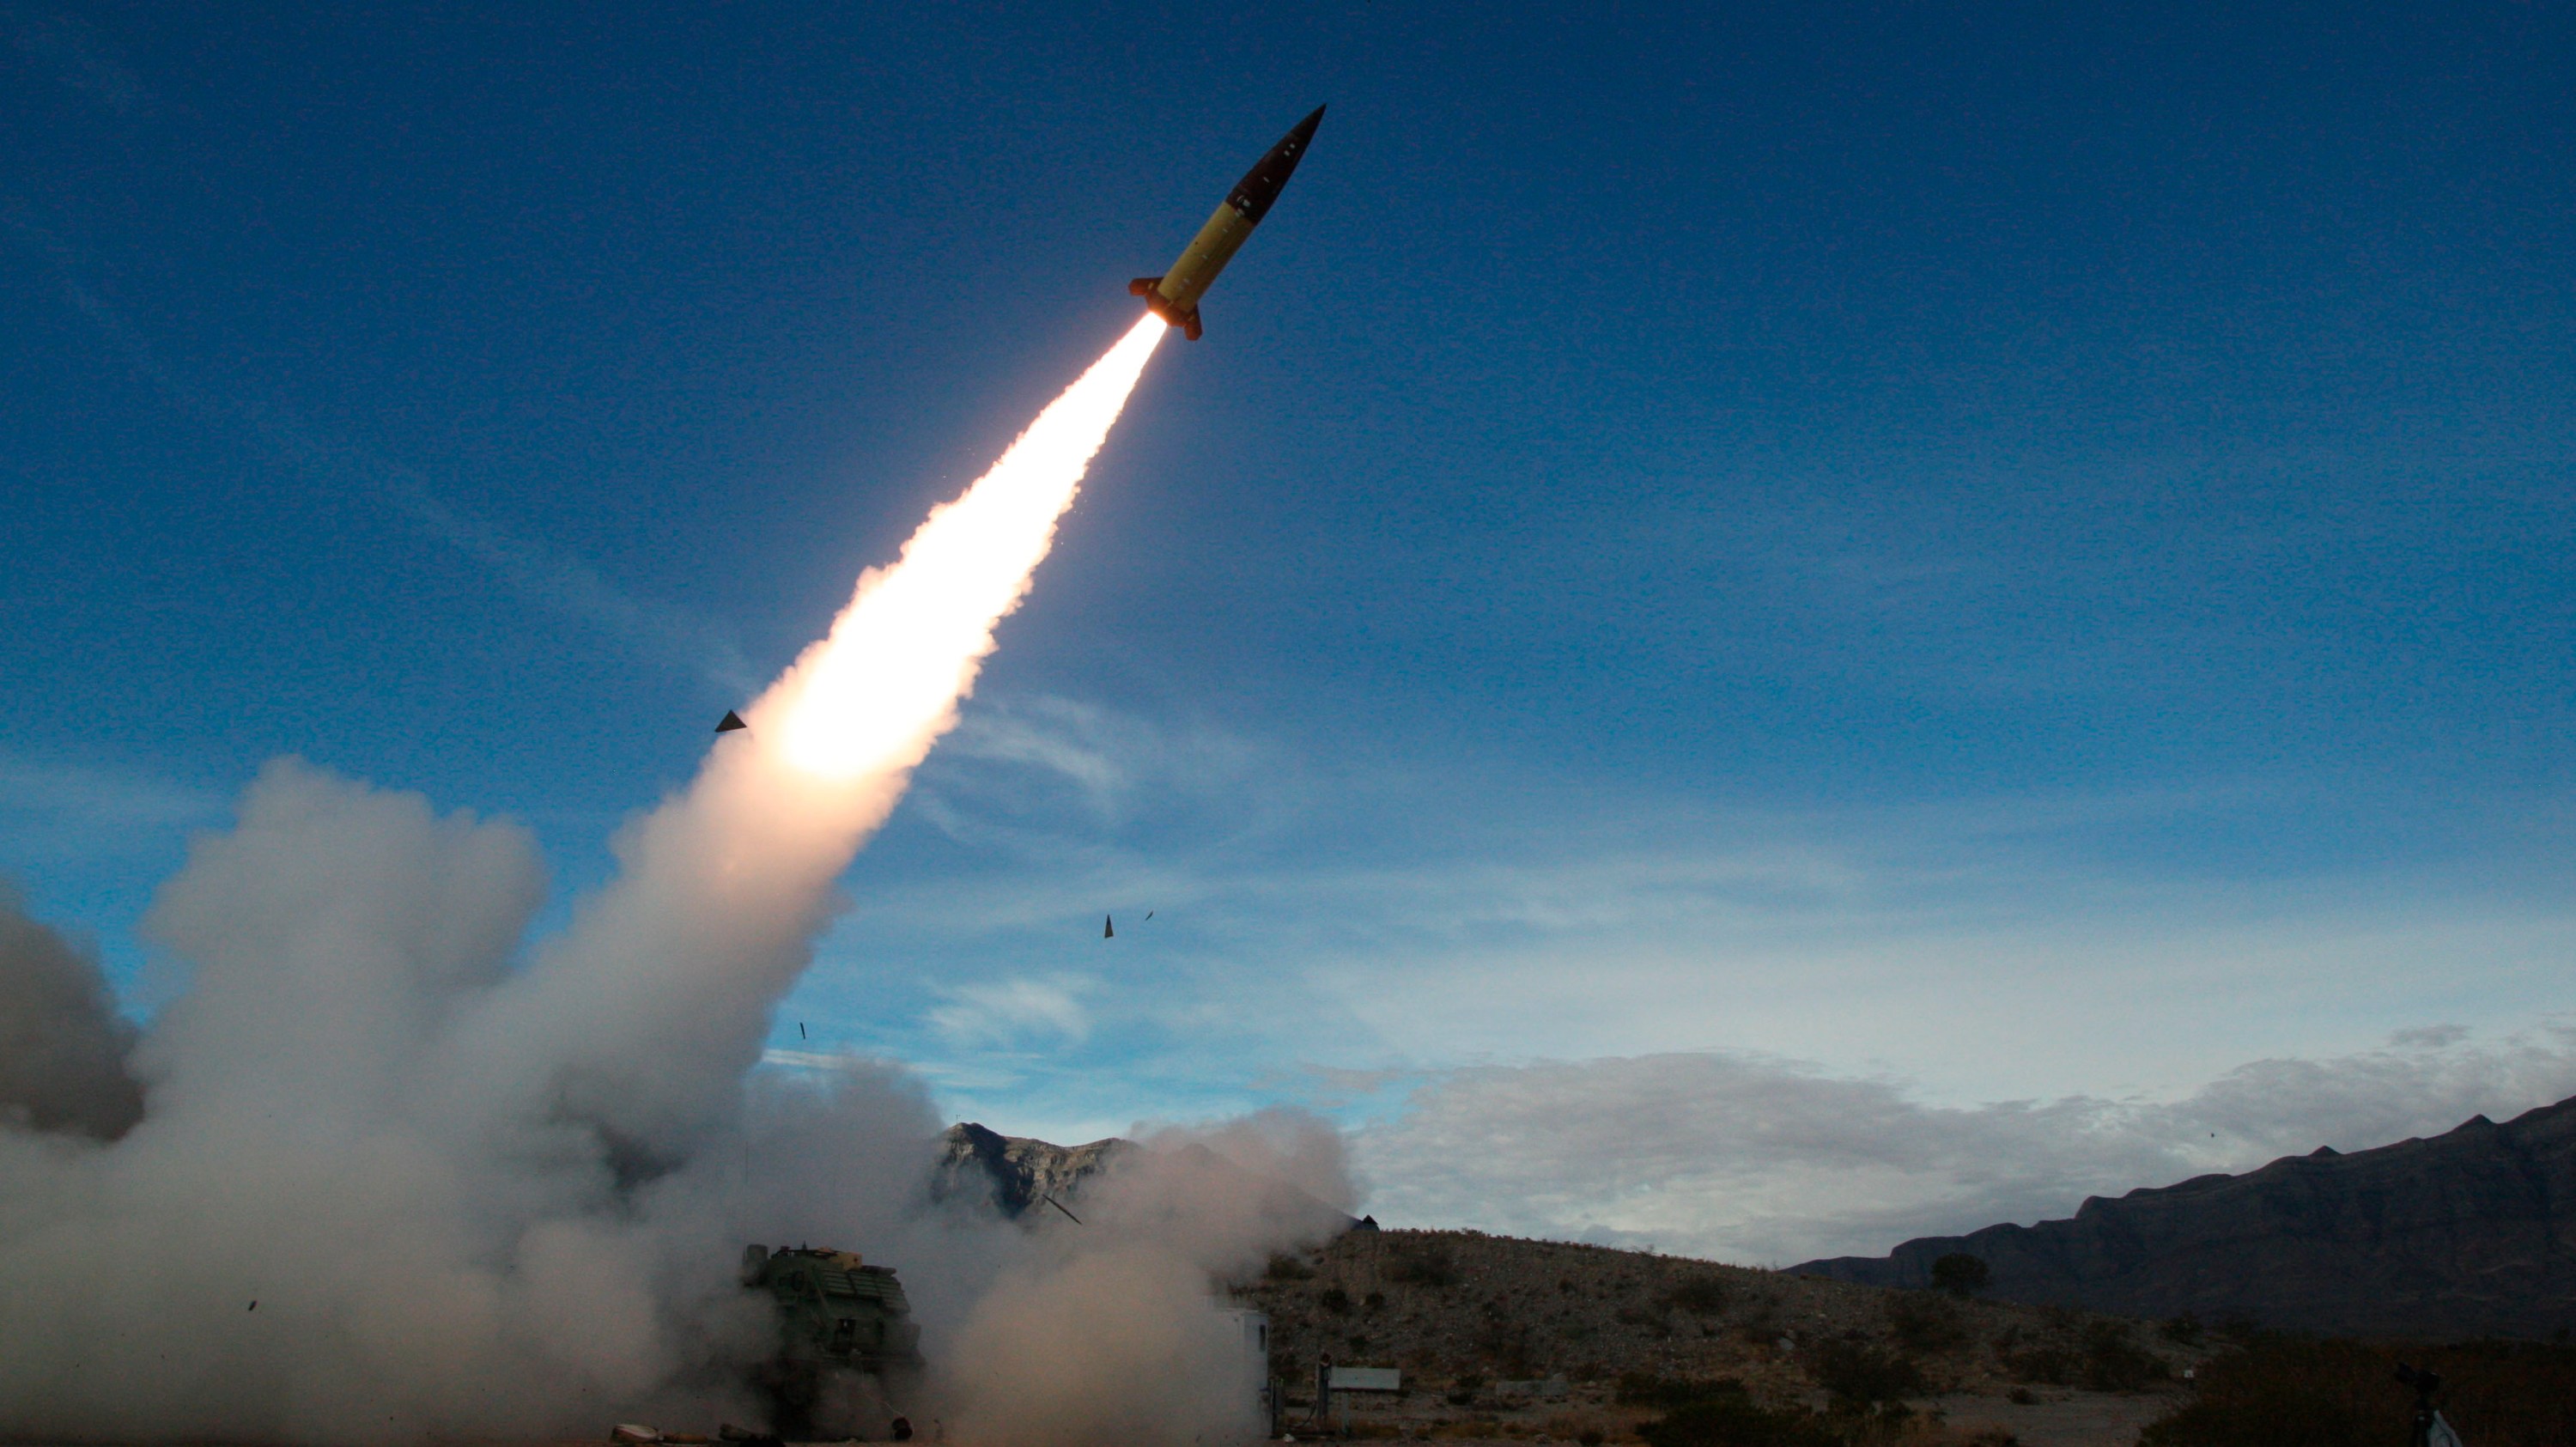 A Army Tactical Missile System is fired during a testing near Fort Bragg, N.C.